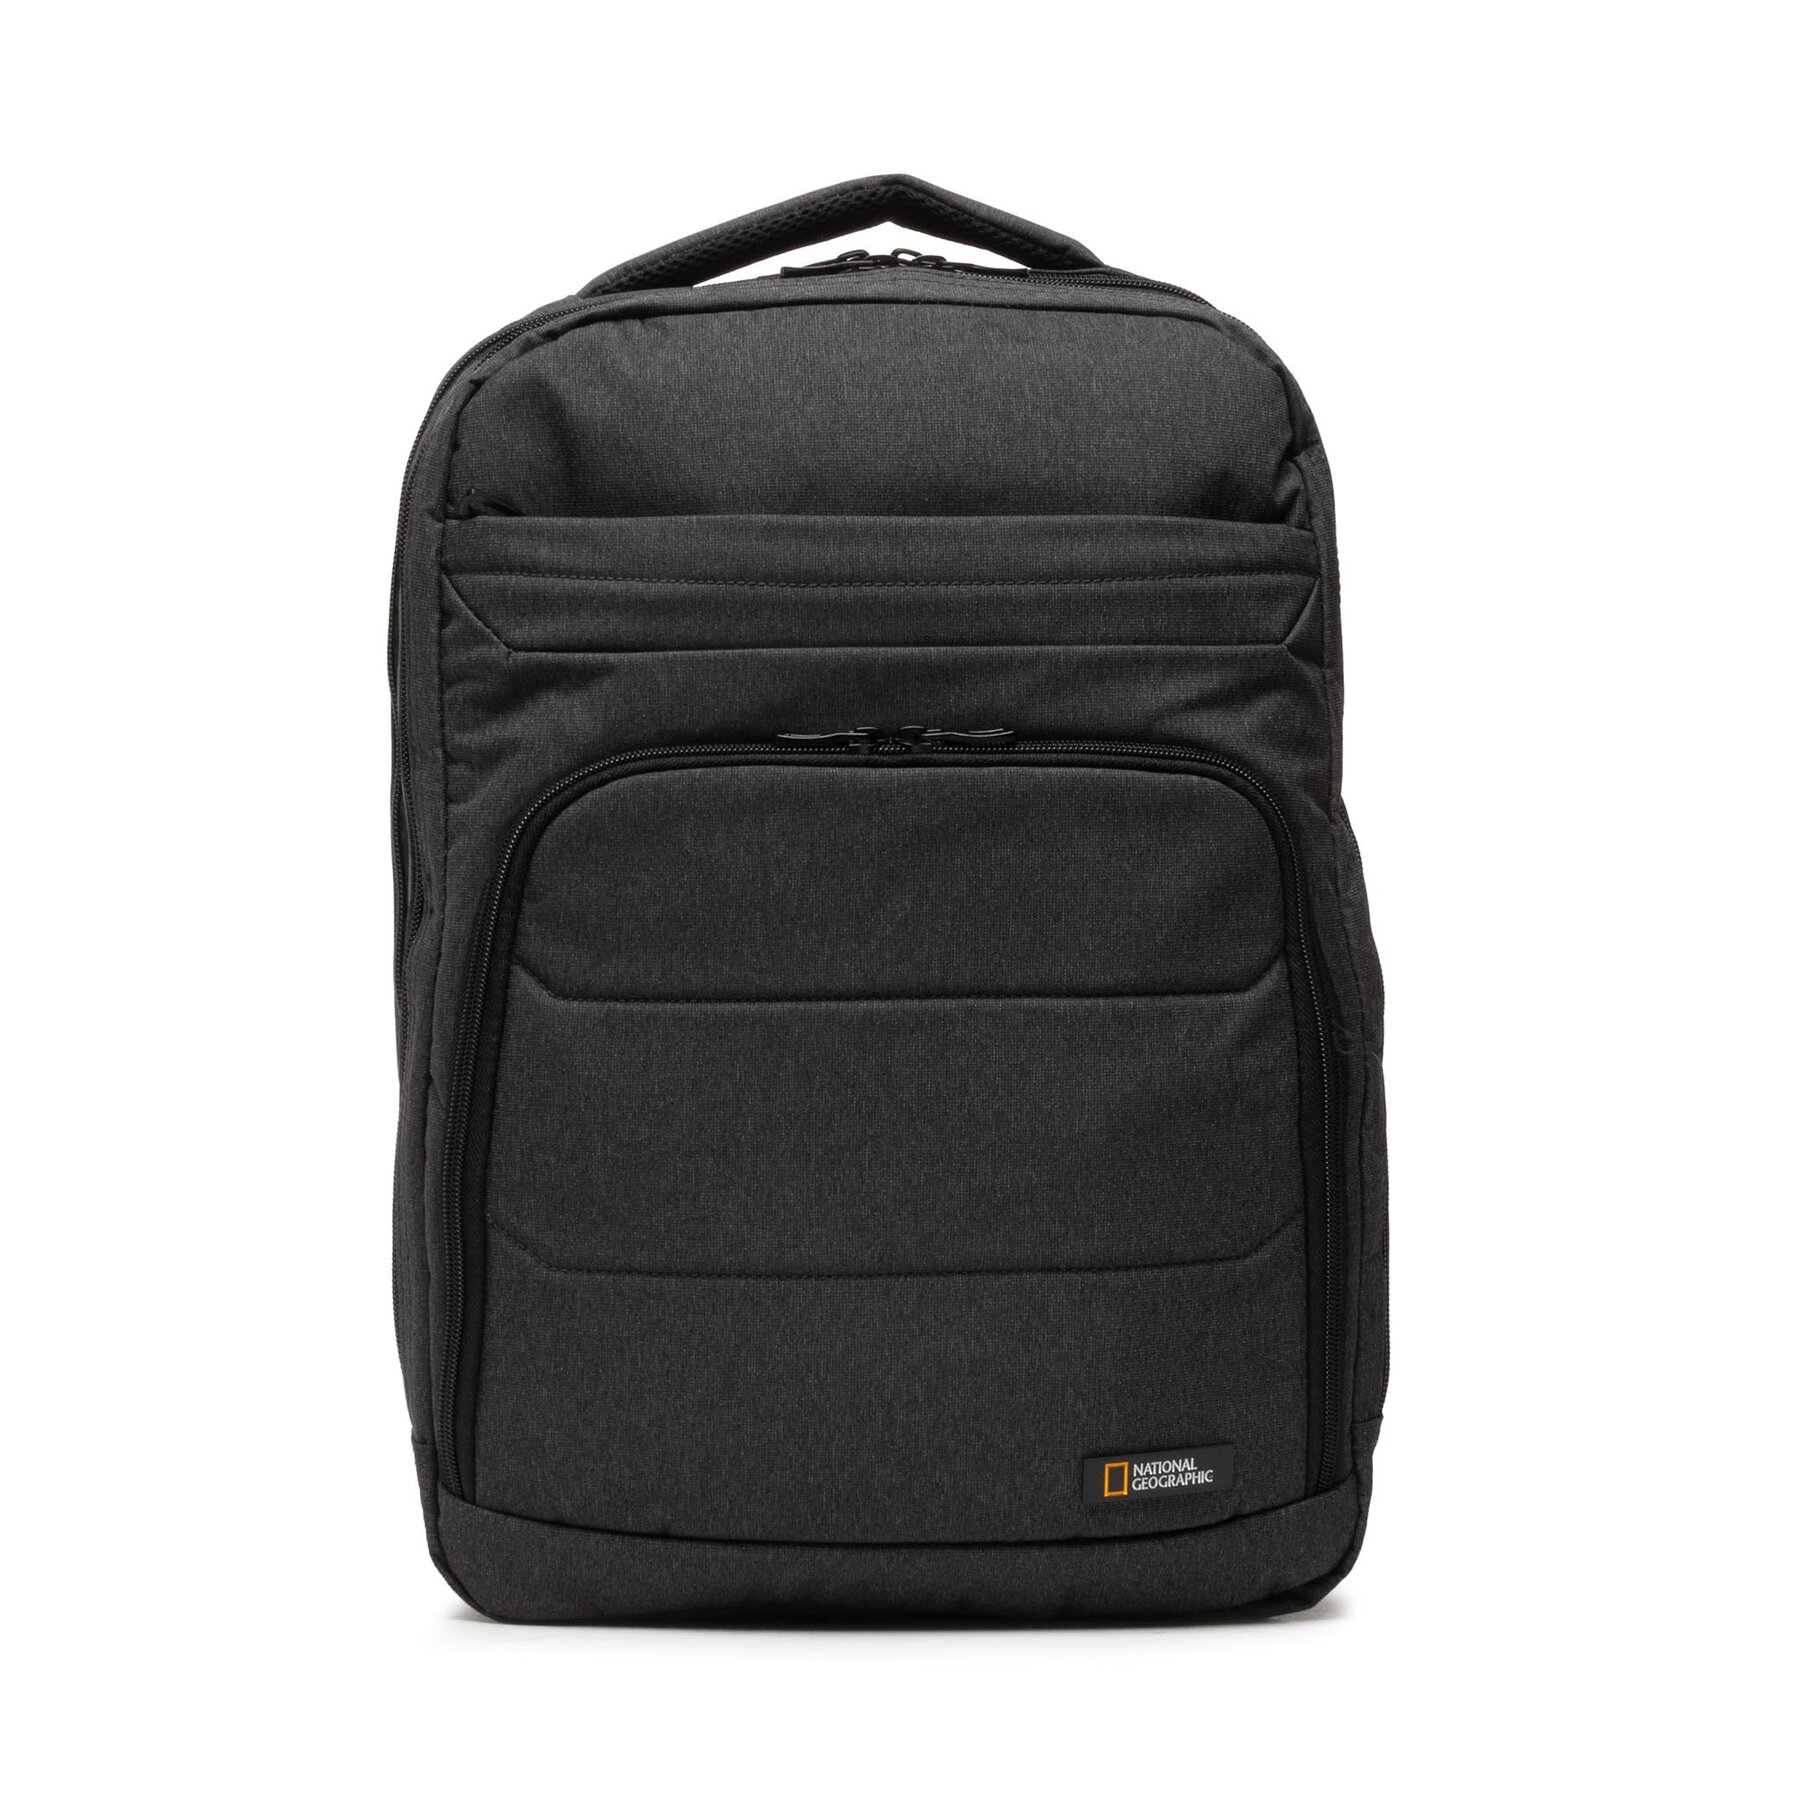 Rucksack National Geographic Backpack-2 Compartment N00710.125 Two Tone Grey von National Geographic